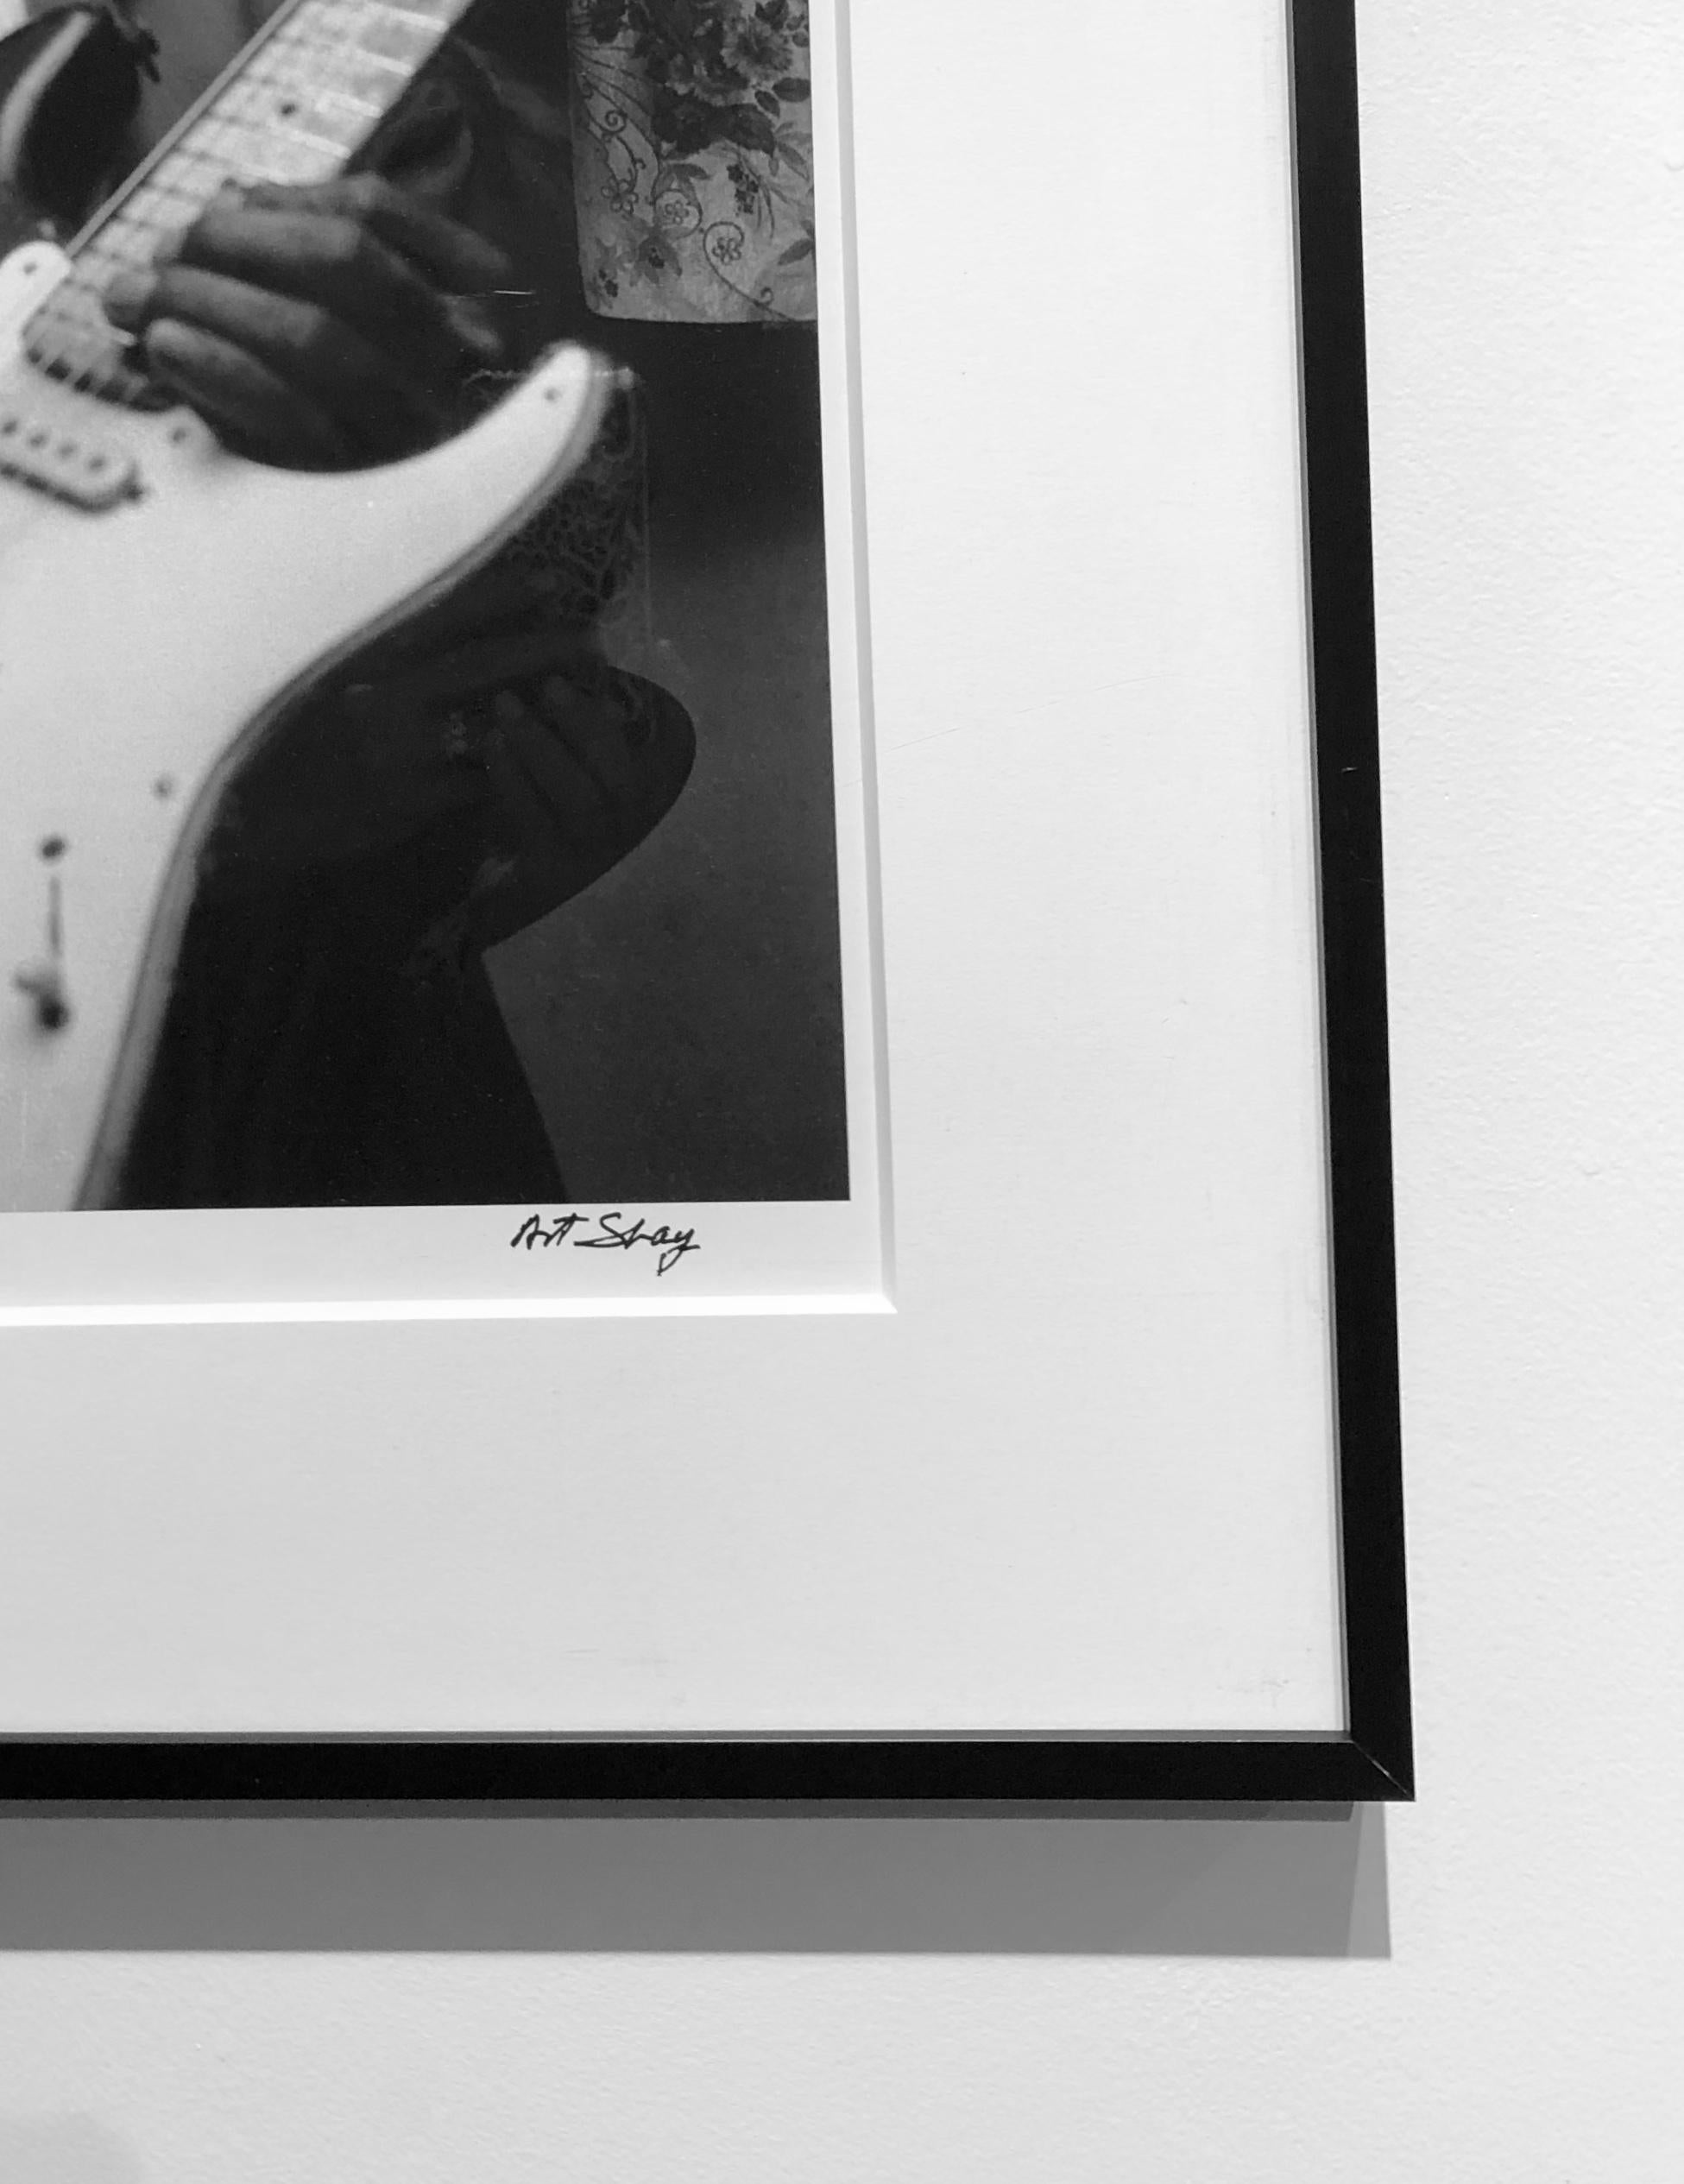 Blues Guitarist, Buddy Guy, 1966, Playing Guitar, Framed Photograph by Art Shay For Sale 1